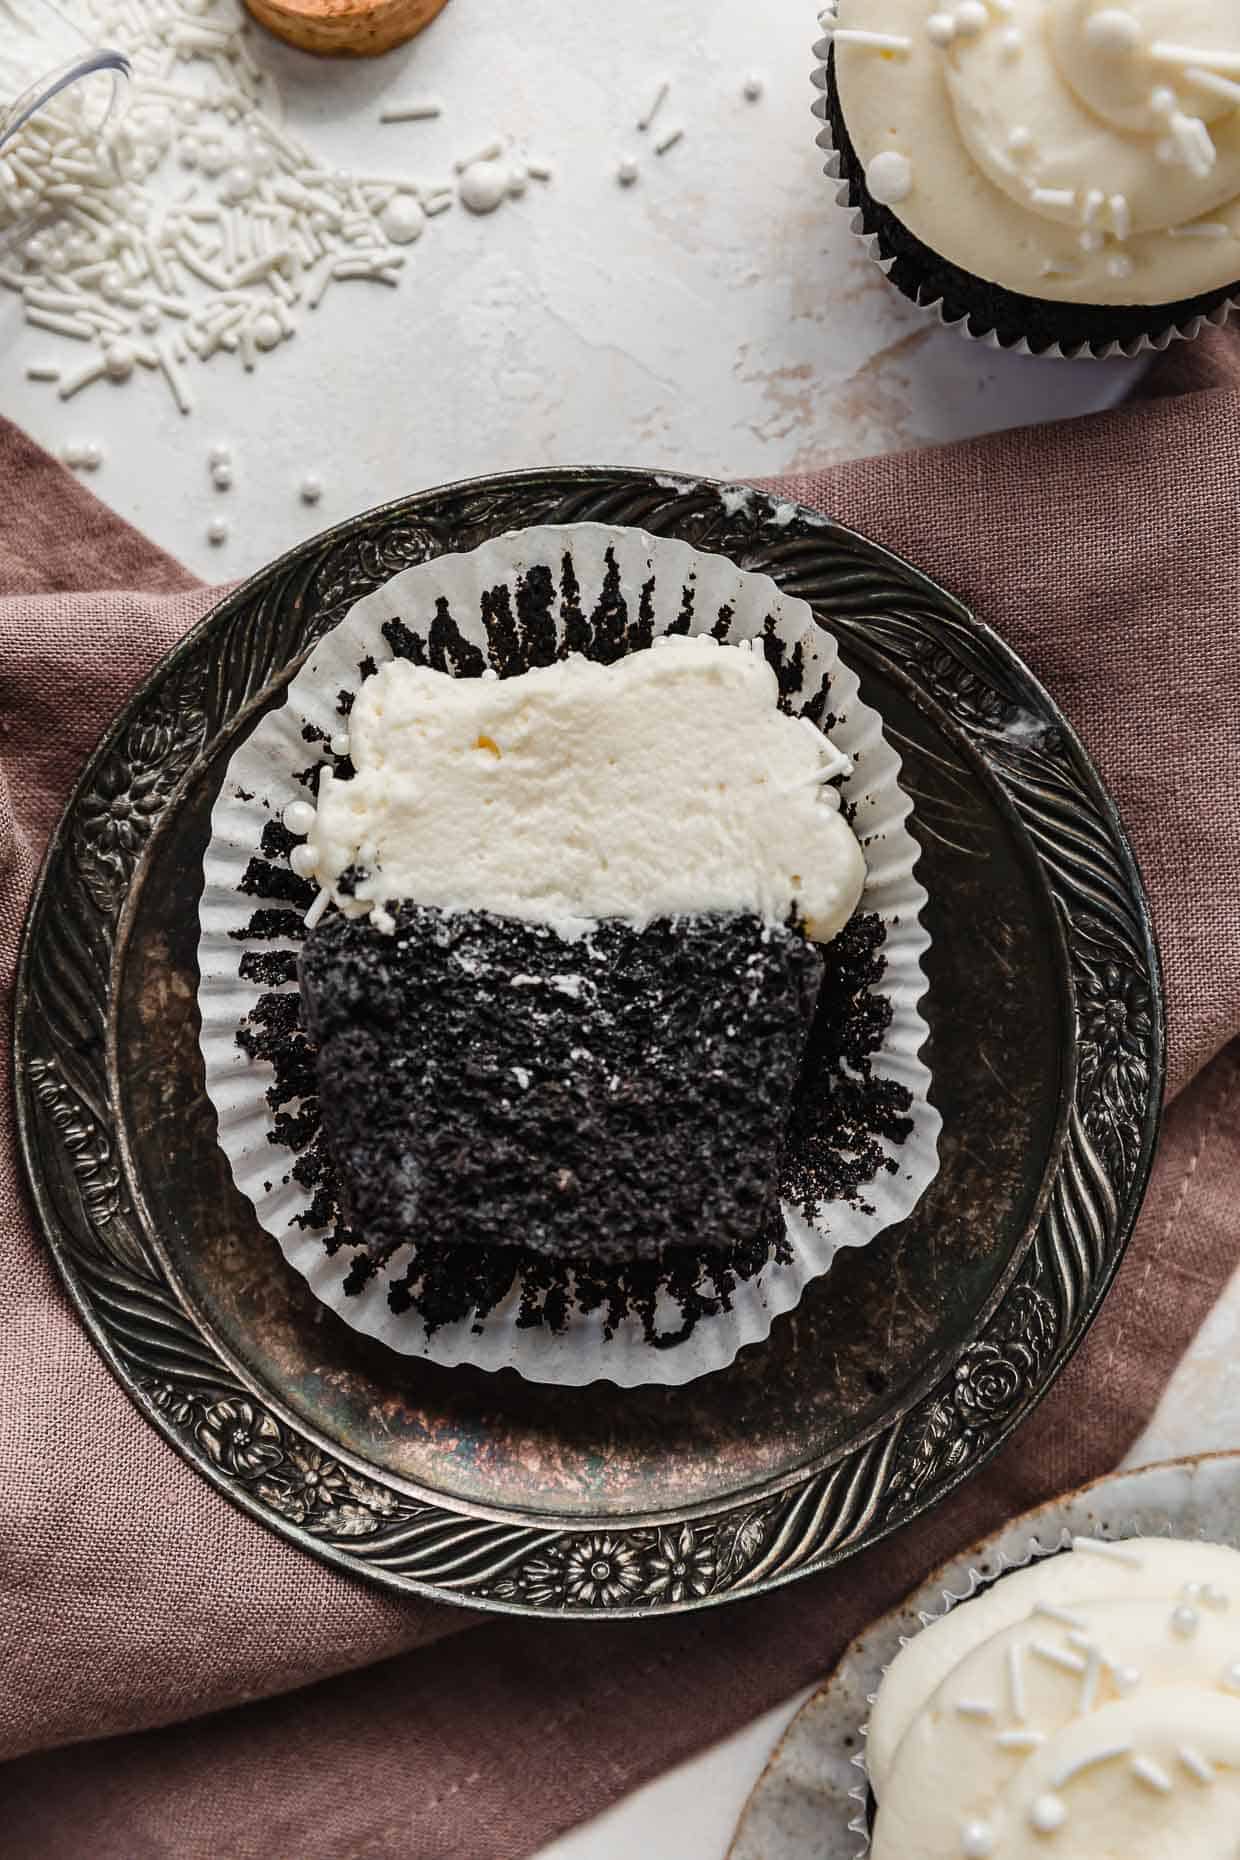 A black cocoa cupcake topped with homemade Whipped Cream Frosting cut in half, on a vintage plate.